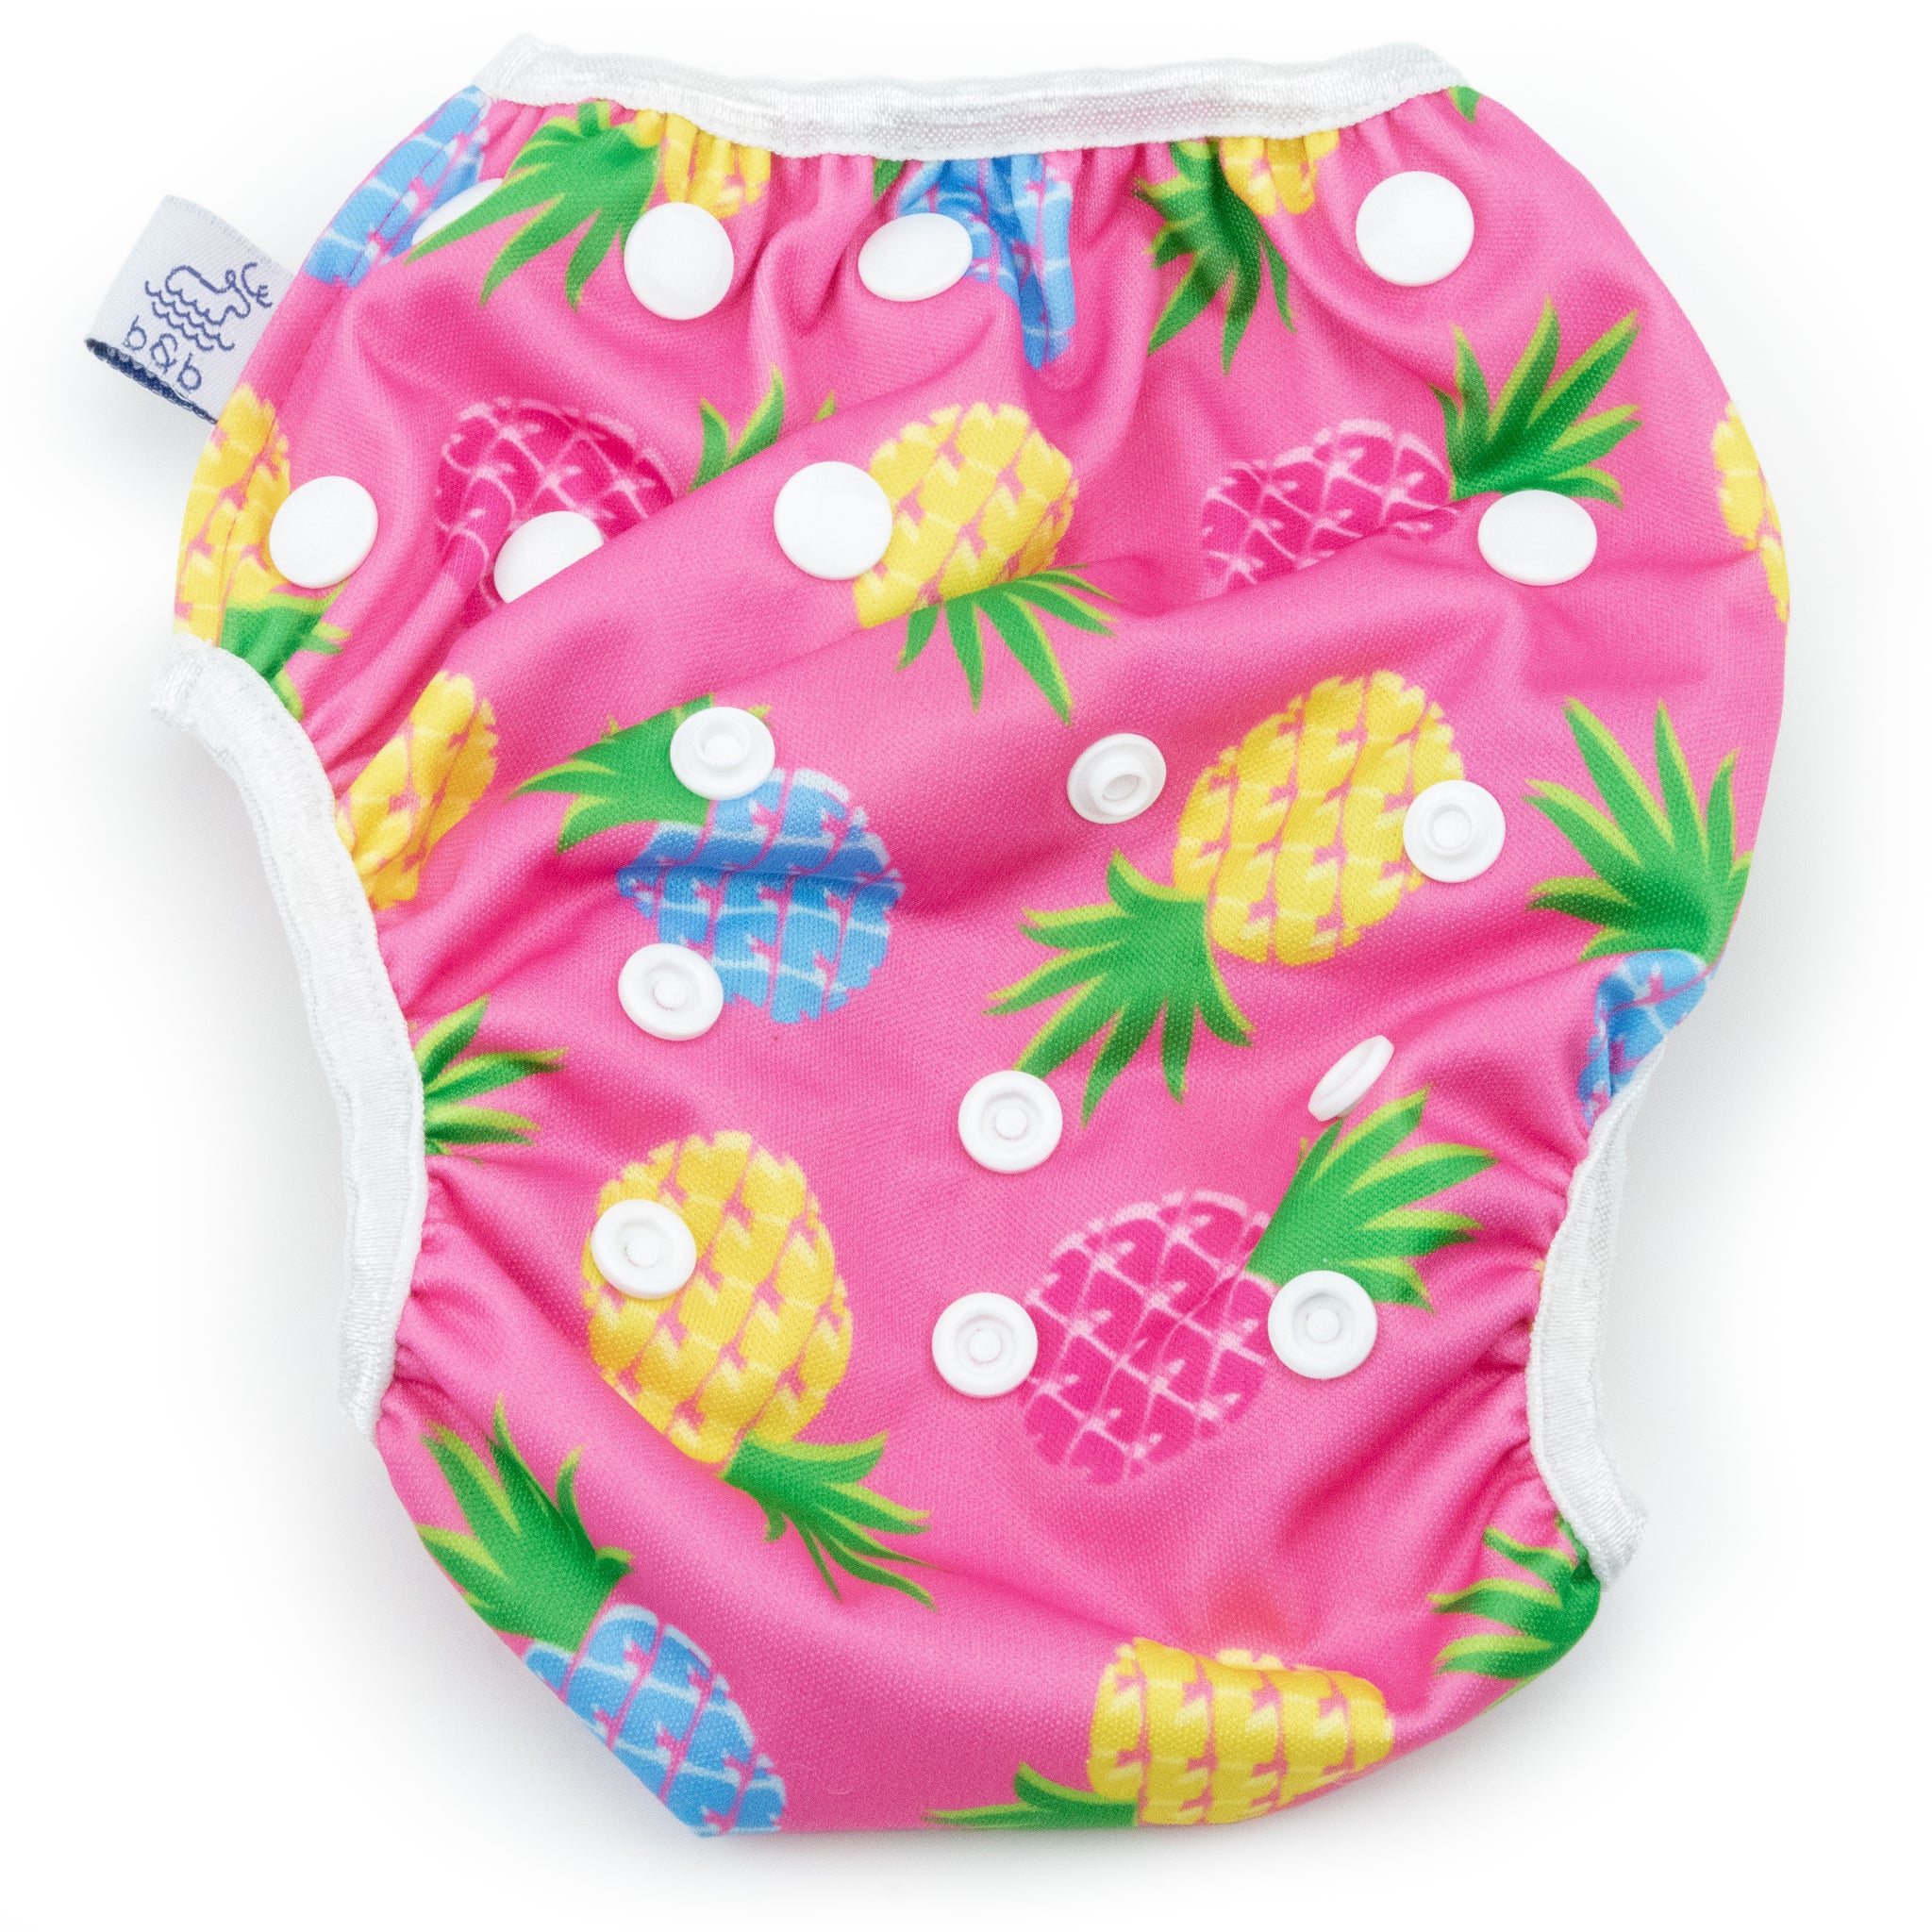 Beau and Belle Littles Swim Diaper, Regular Size, light pink background with yellow, dark pink, and blue pineapples, flat lay, front view